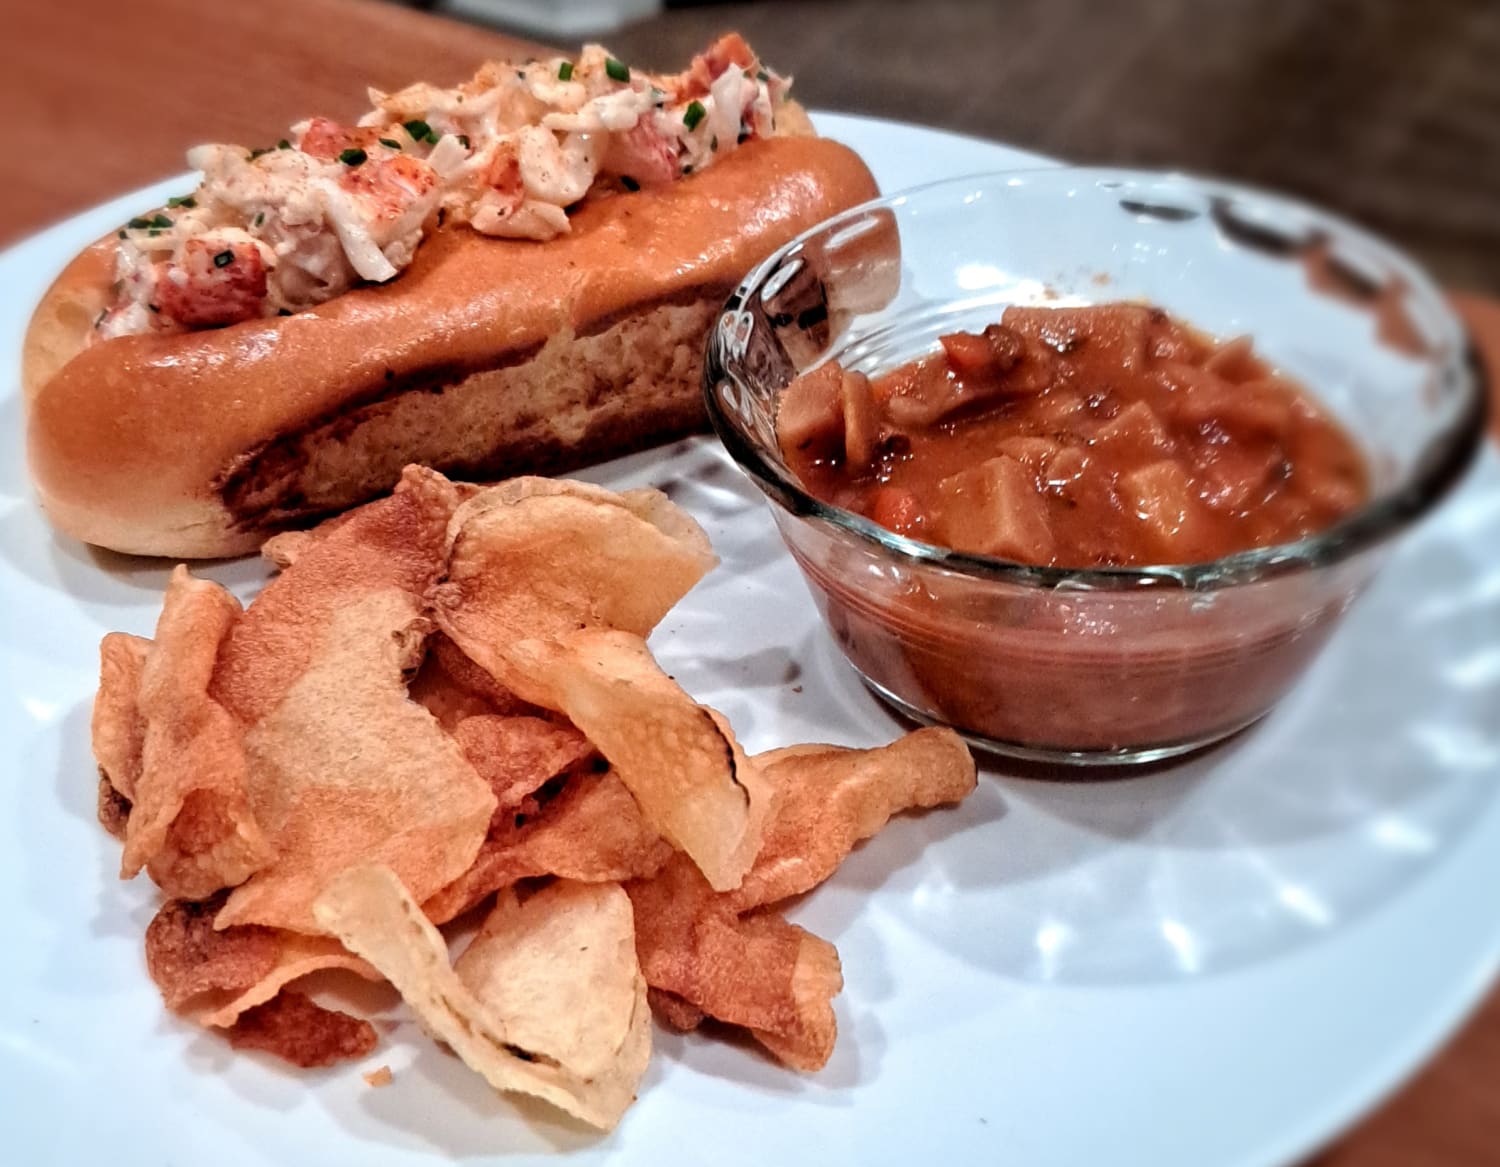 My wife made homemade Lobster rolls, Manhattan clam chowder and Russet potatoe chips.